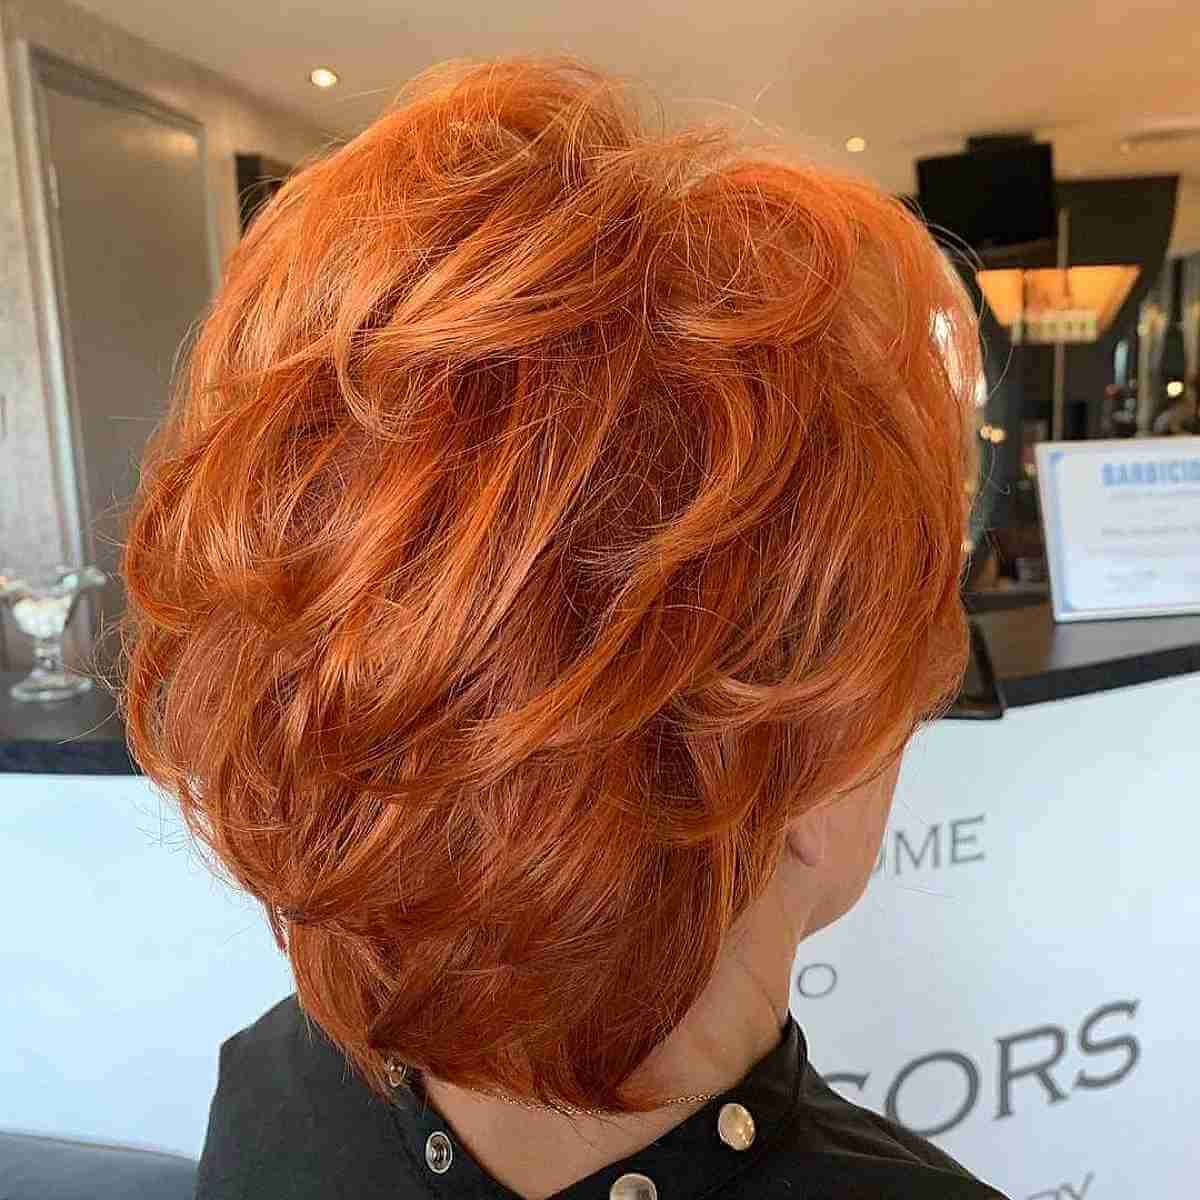 Vibrant Copper Hair with Short Layers